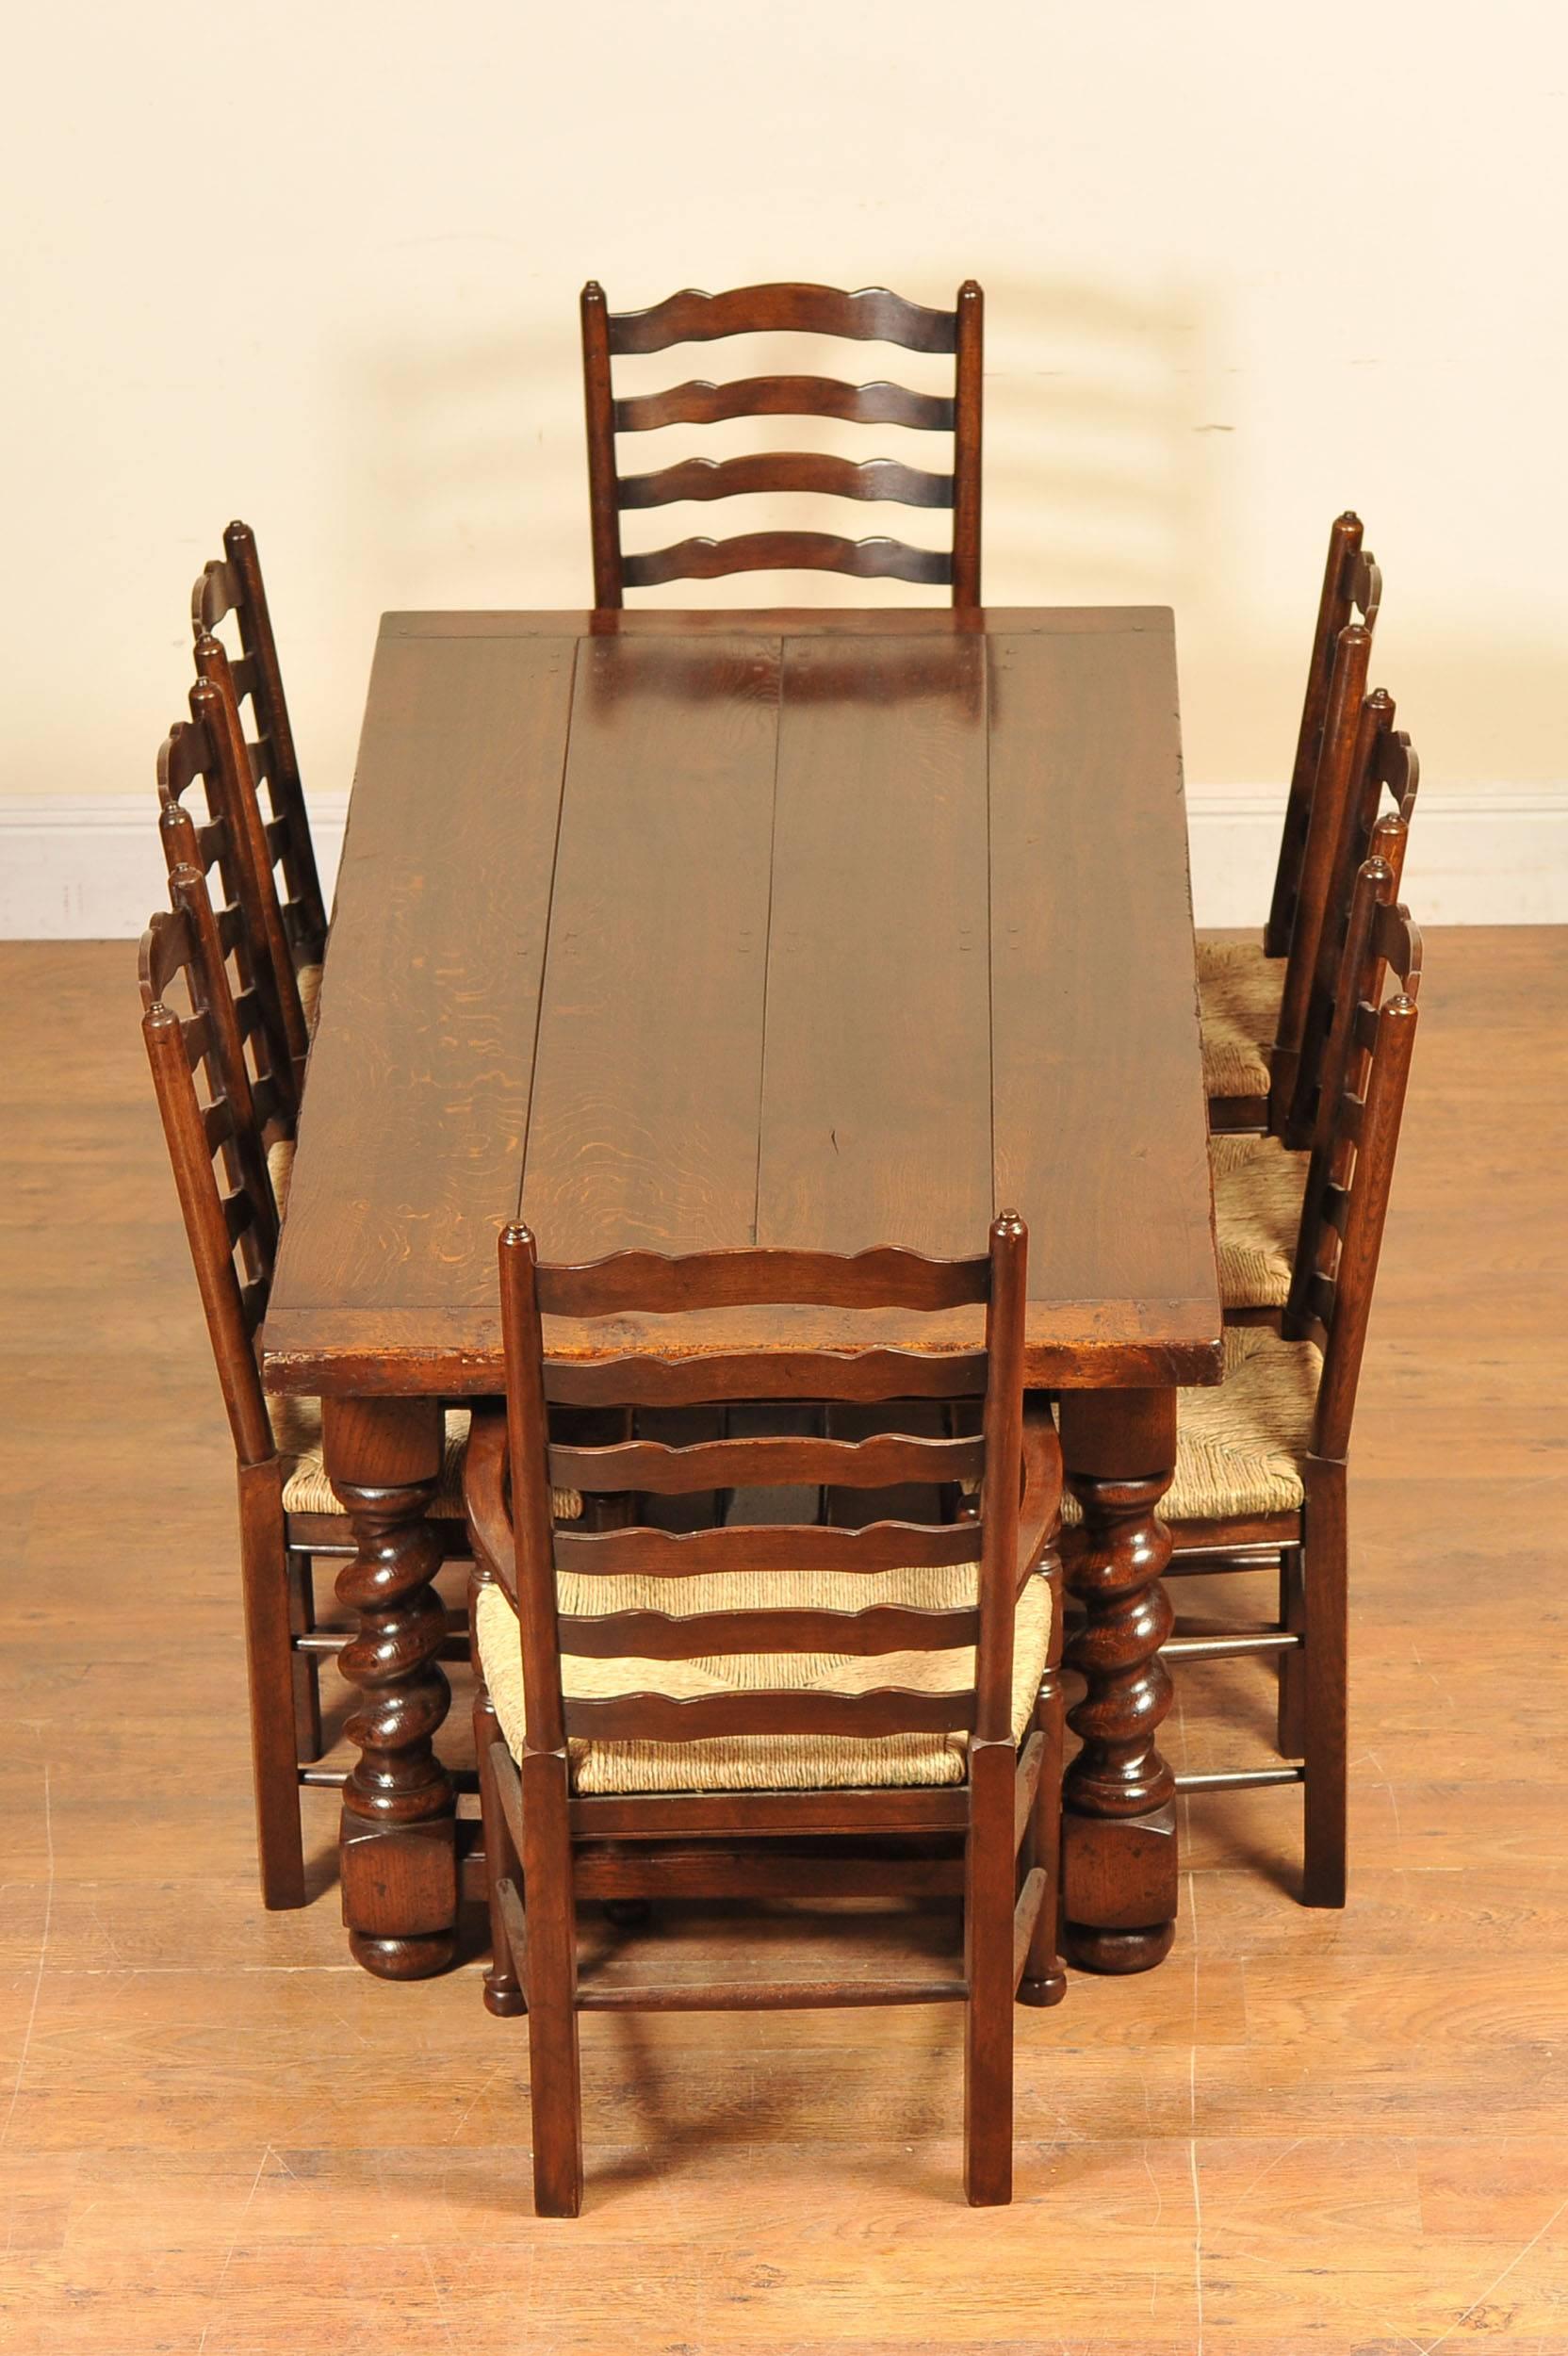 Come view this for yourself in our Hertfordshire showroom:
- Stunning farmhouse refectory table with barley twist legs and a matching set of eight oak ladderback chairs
- If you are looking for the ultimate farmhouse dining set then here it is
-